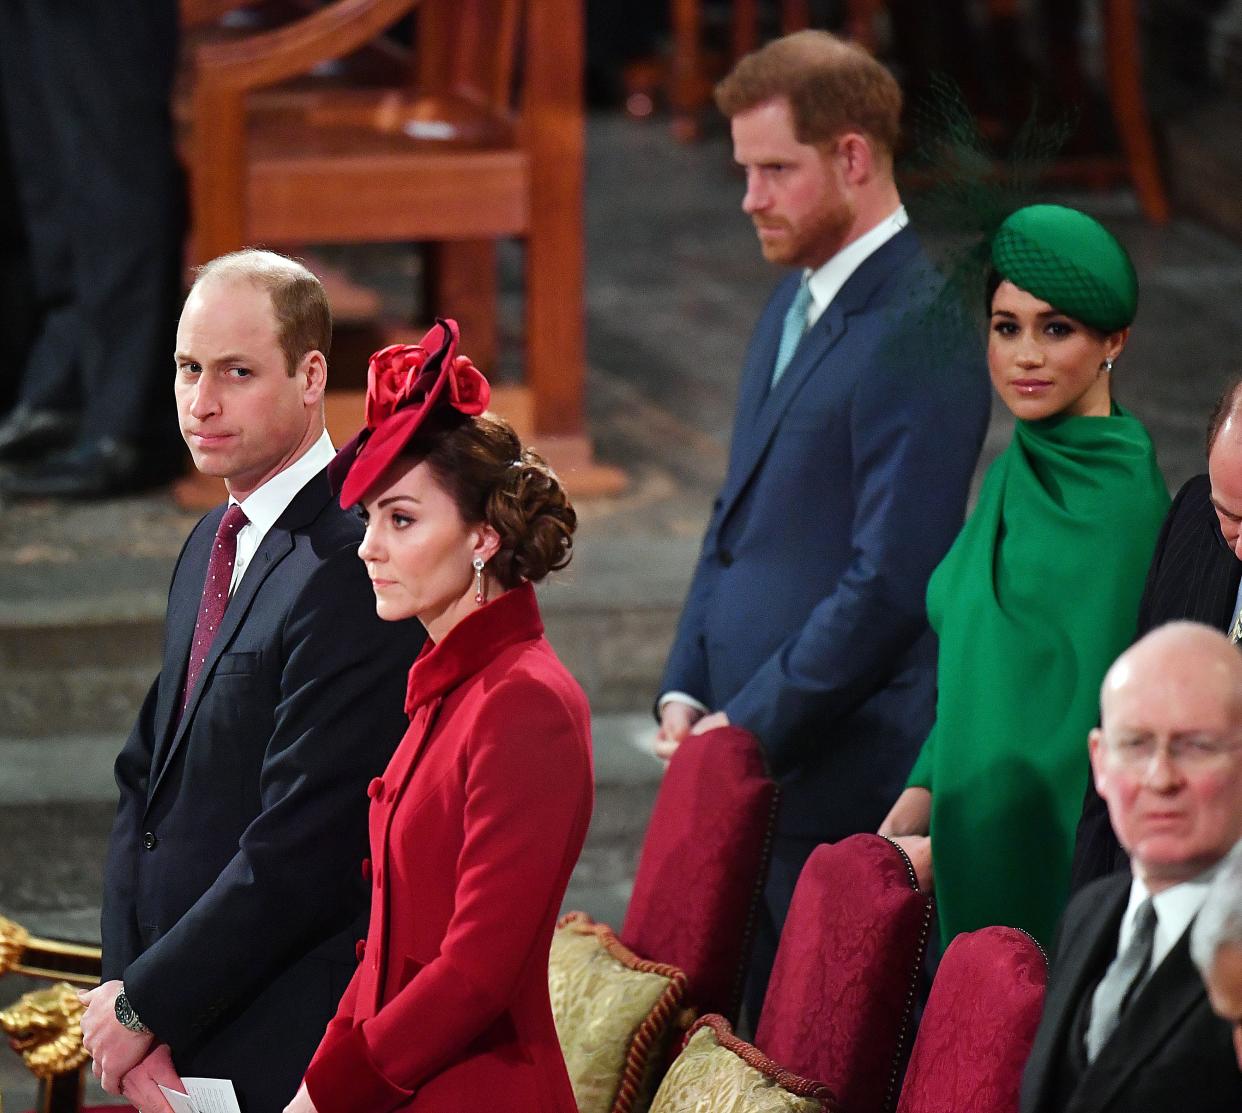 Britain's Prince Harry, Duke of Sussex, (2nd R) and Britain's Meghan, Duchess of Sussex (R) sit behind Britain's Prince William (L), Duke of Cambridge and Britain's Catherine, Duchess of Cambridge (2nd L) inside Westminster Abbey as they attend the annual Commonwealth Service in London on March 9, 2020. - Britain's Queen Elizabeth II has been the Head of the Commonwealth throughout her reign. Organised by the Royal Commonwealth Society, the Service is the largest annual inter-faith gathering in the United Kingdom. (Photo by Phil HARRIS / POOL / AFP) (Photo by PHIL HARRIS/POOL/AFP via Getty Images)